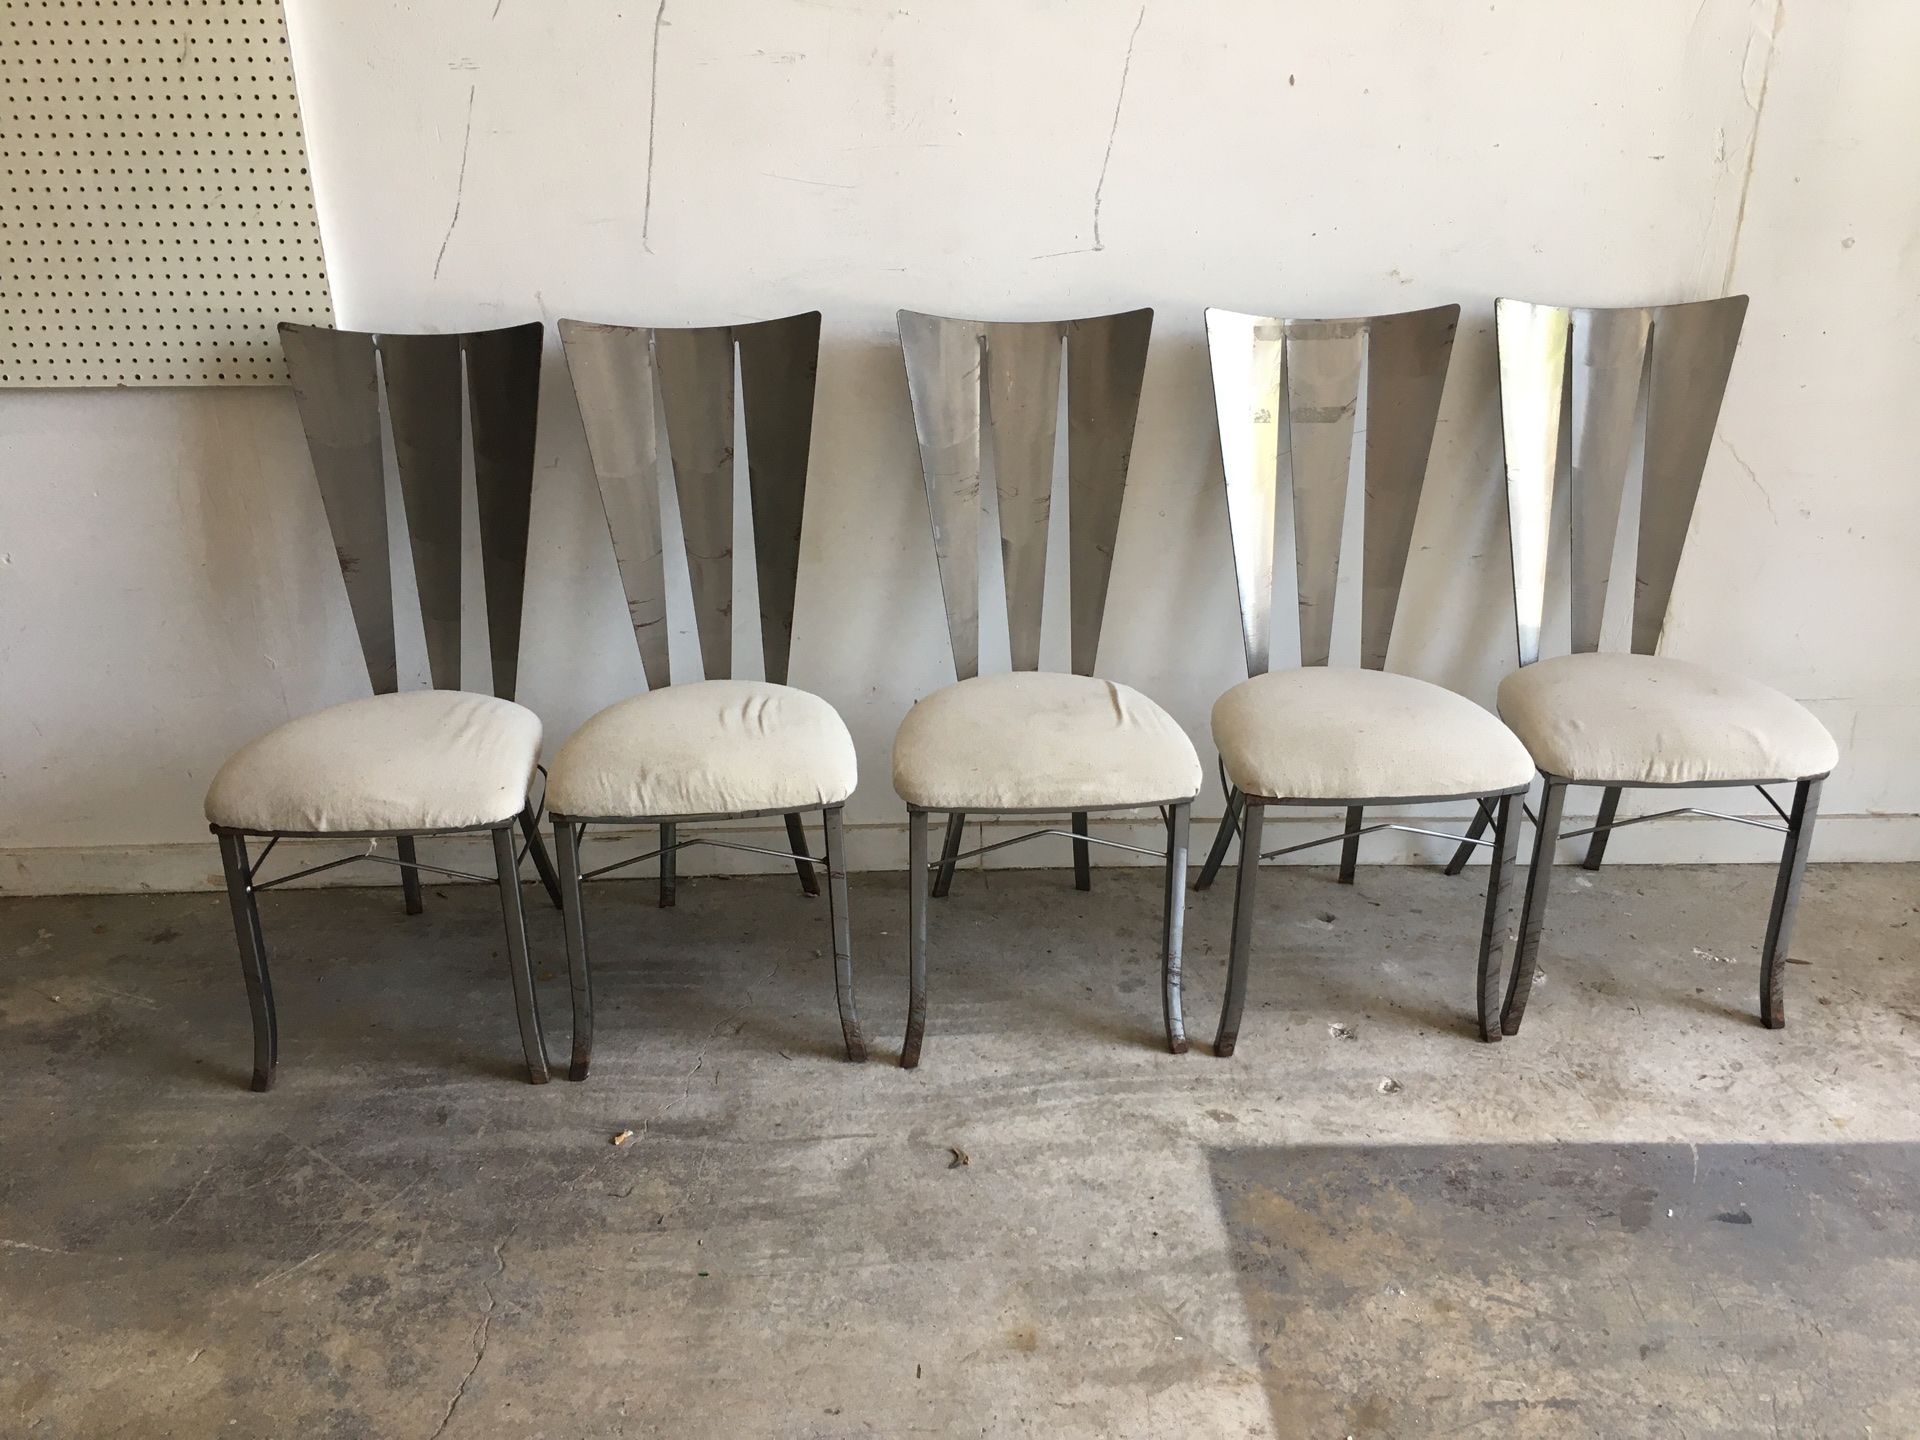 Stainless Steel Designer Chairs-One of a kind-Hand Made-5 for $150-Firm-Little Haiti Warehouse Liquidation-Bryce LeVan Cushing Liquidator